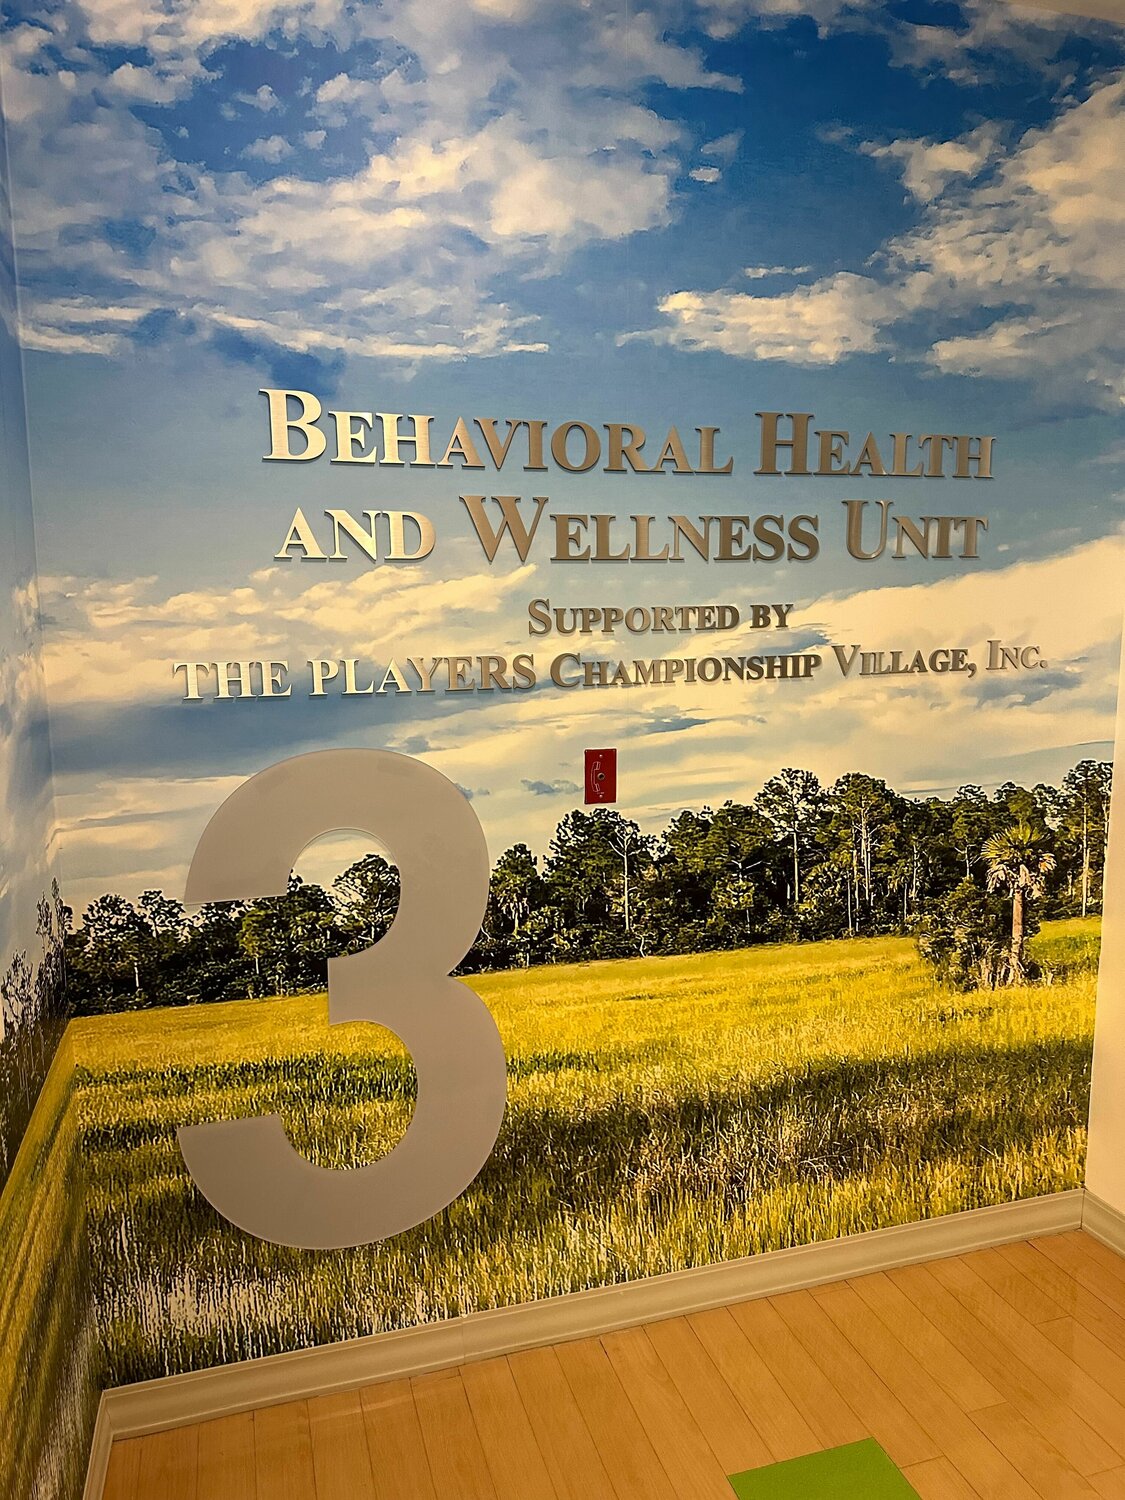 The entrance biome for the new Behavioral Health and Wellness Unit at Wolfson Children's Hospital